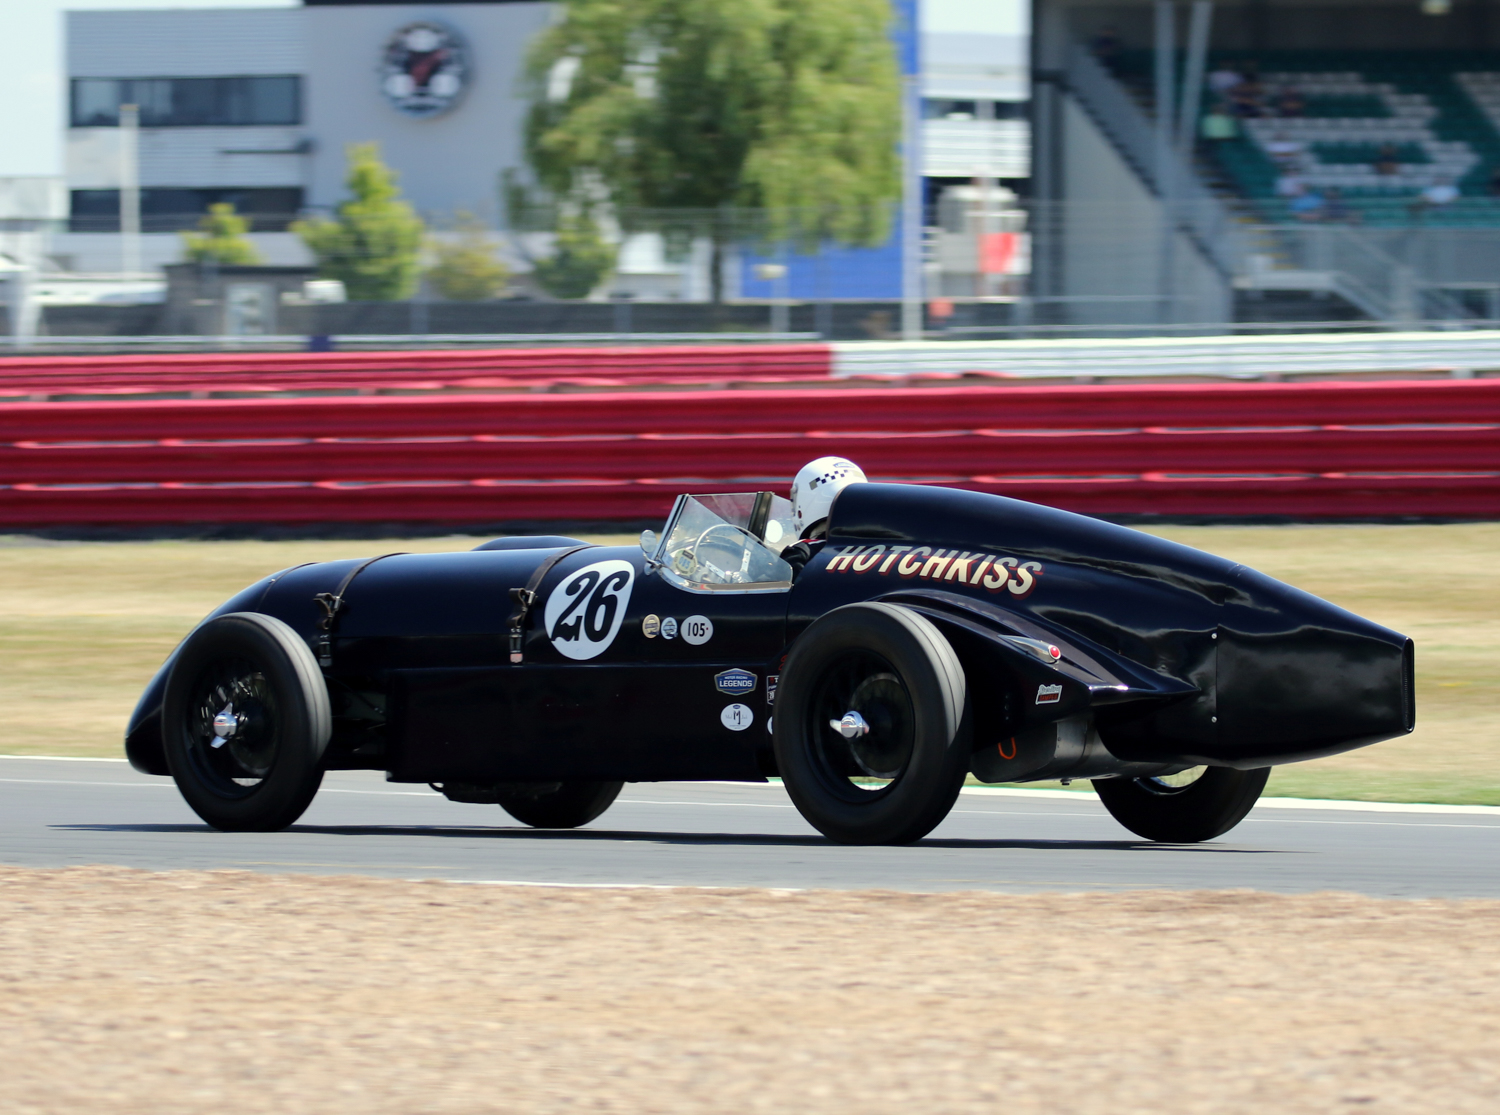 MONTLHERY RECORD HOTCHKISS AM 80 WAS DRIVEN BYSTEVEN SMITH. Picasa